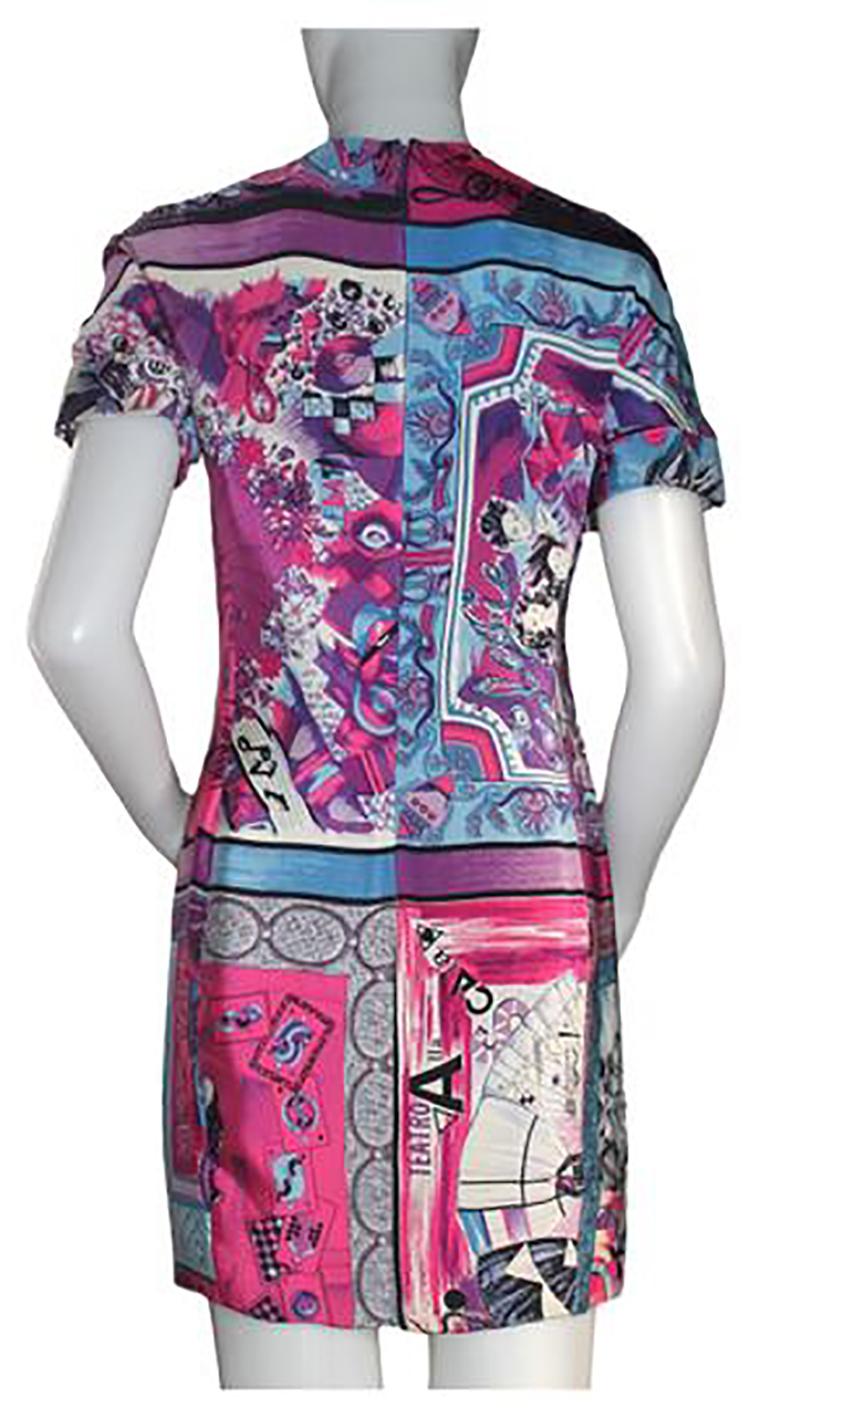 GIANNI VERSACE

CANTASTORIE PRINT DRESS from COMMEDIA DELL'ARTE / ART COMMEDY collection

Content: 100% cotton

Size 42 - US 8

Pre-owned, good condition!
 100% authentic guarantee 

       PLEASE VISIT OUR STORE FOR MORE GREAT ITEMS 




pos